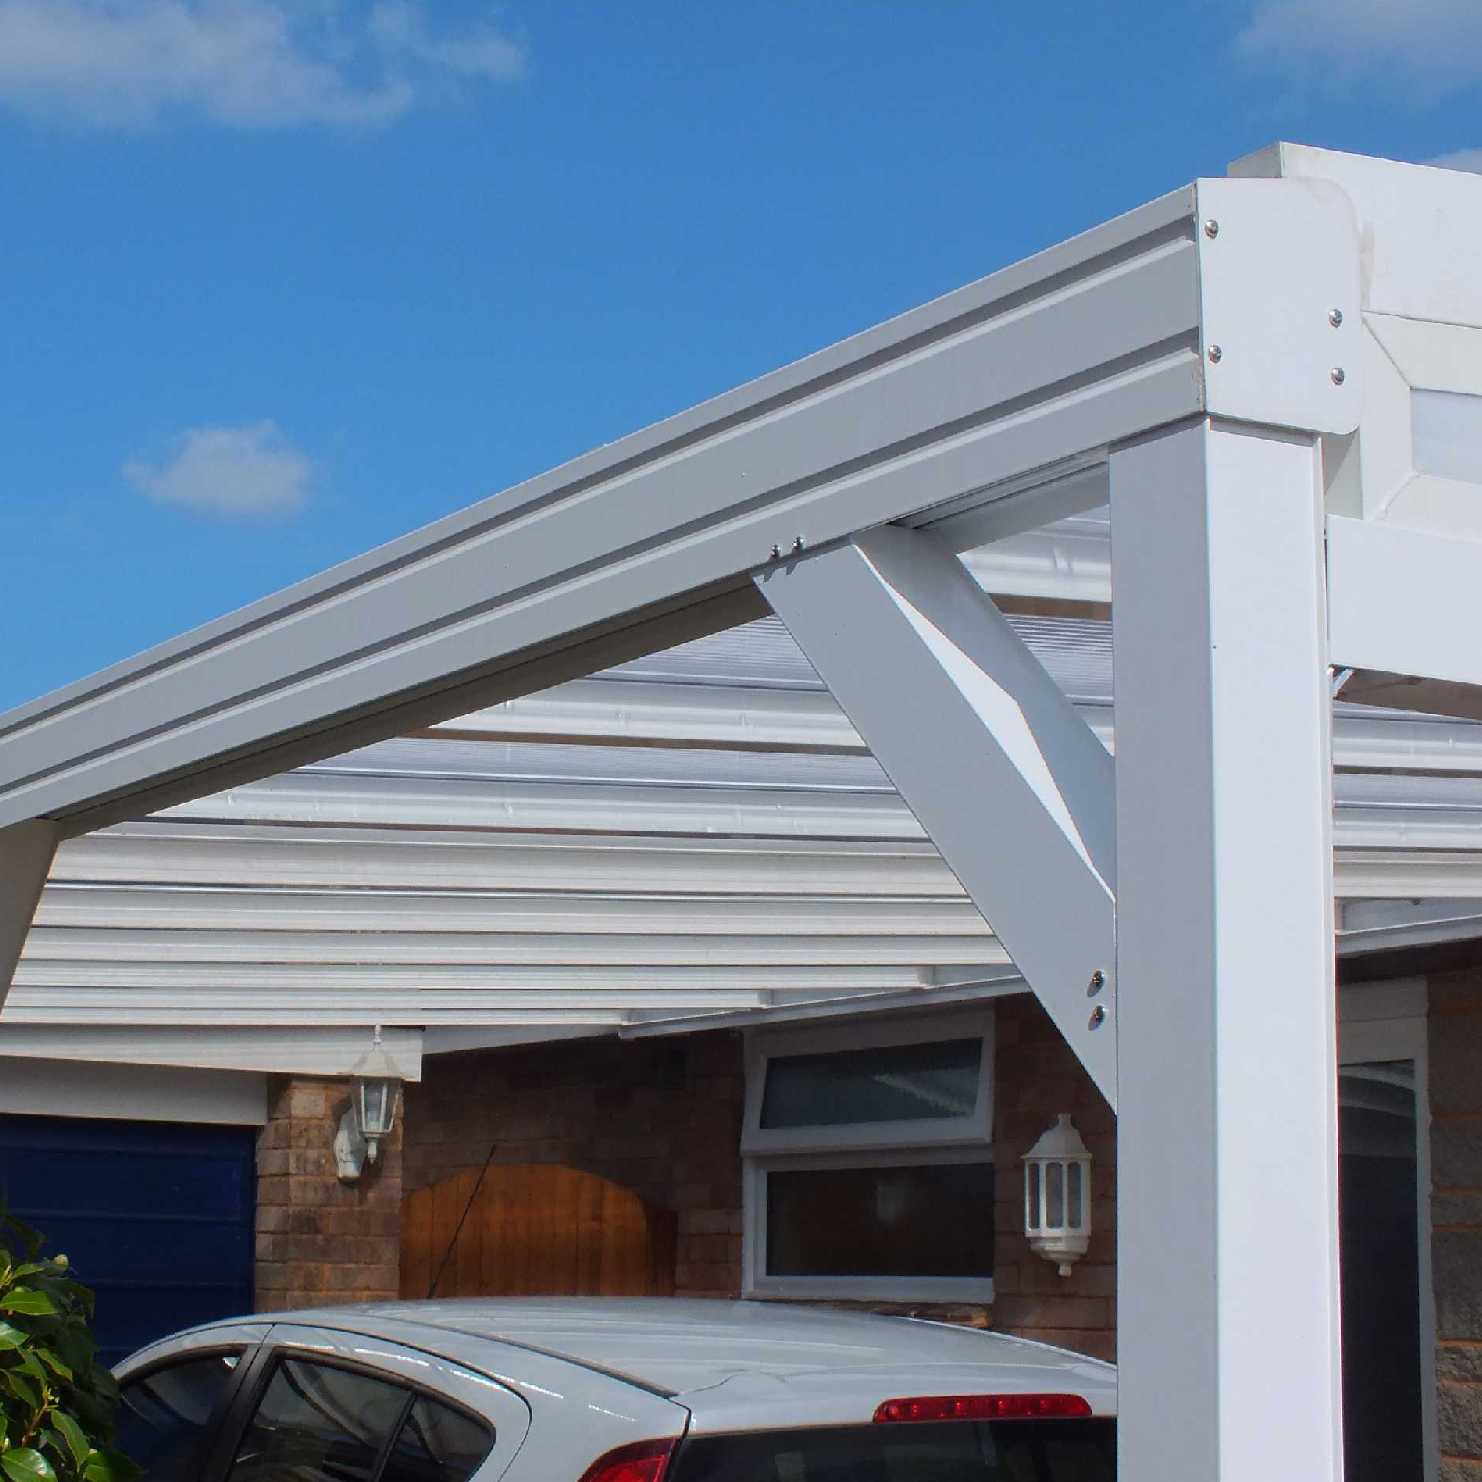 Buy Omega Smart Lean-To Canopy, White with 16mm Polycarbonate Glazing - 9.6m (W) x 4.5m (P), (5) Supporting Posts online today